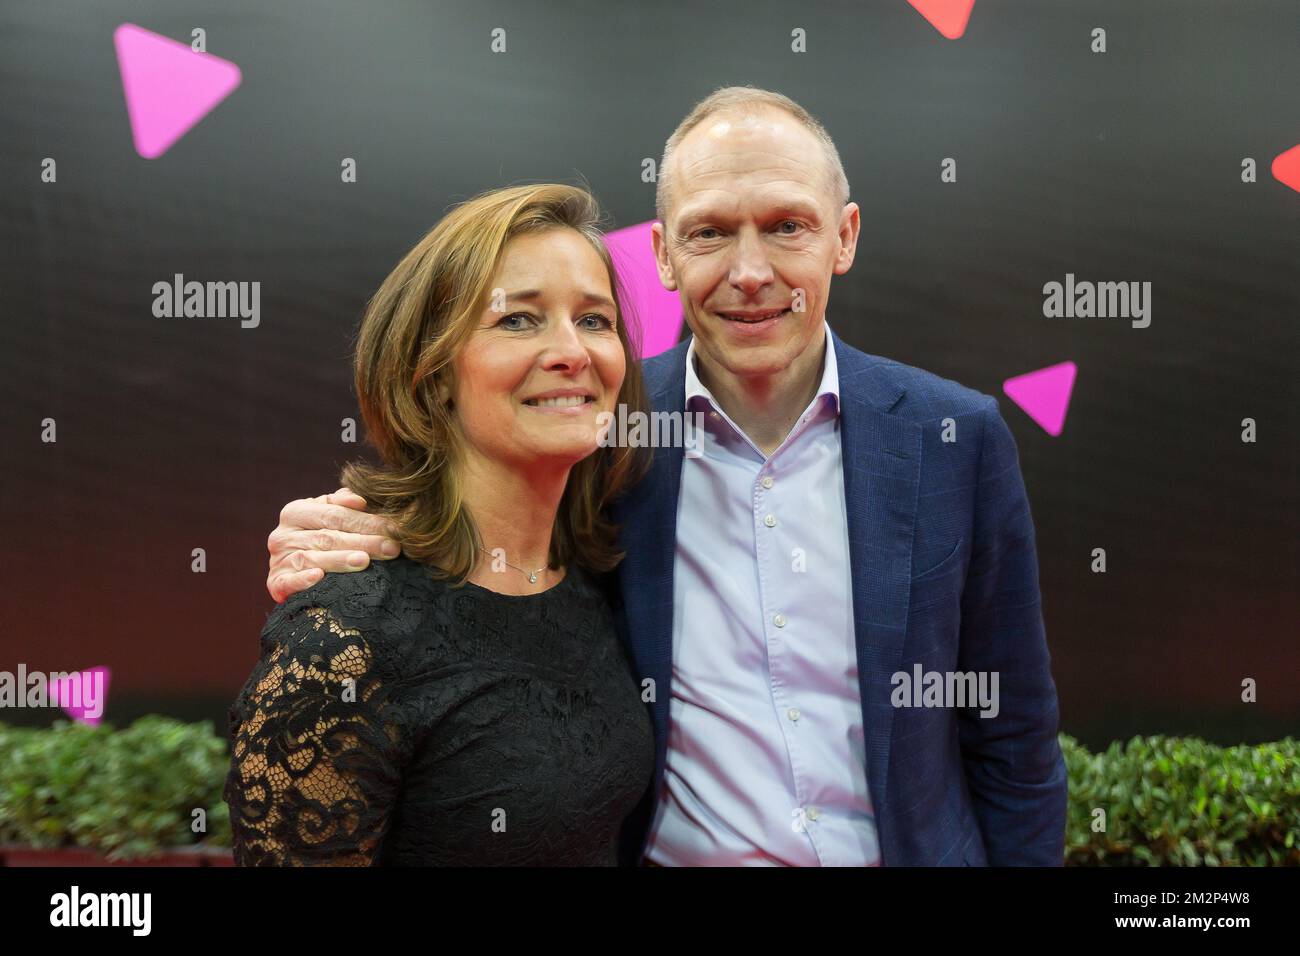 VTM Nieuws journalist Marc Dupain and his wife pictured on the red carpet ahead of the recording of the '30 jaar VTM' show on the occasion of the 30th anniversary of Flemish commercial broadcaster VTM, Wednesday 23 January 2019 in Puurs. On February 1st 1989 the 'Vlaamse Televisie Maatschappij' was launched. BELGA PHOTO JAMES ARTHUR GEKIERE Stock Photo